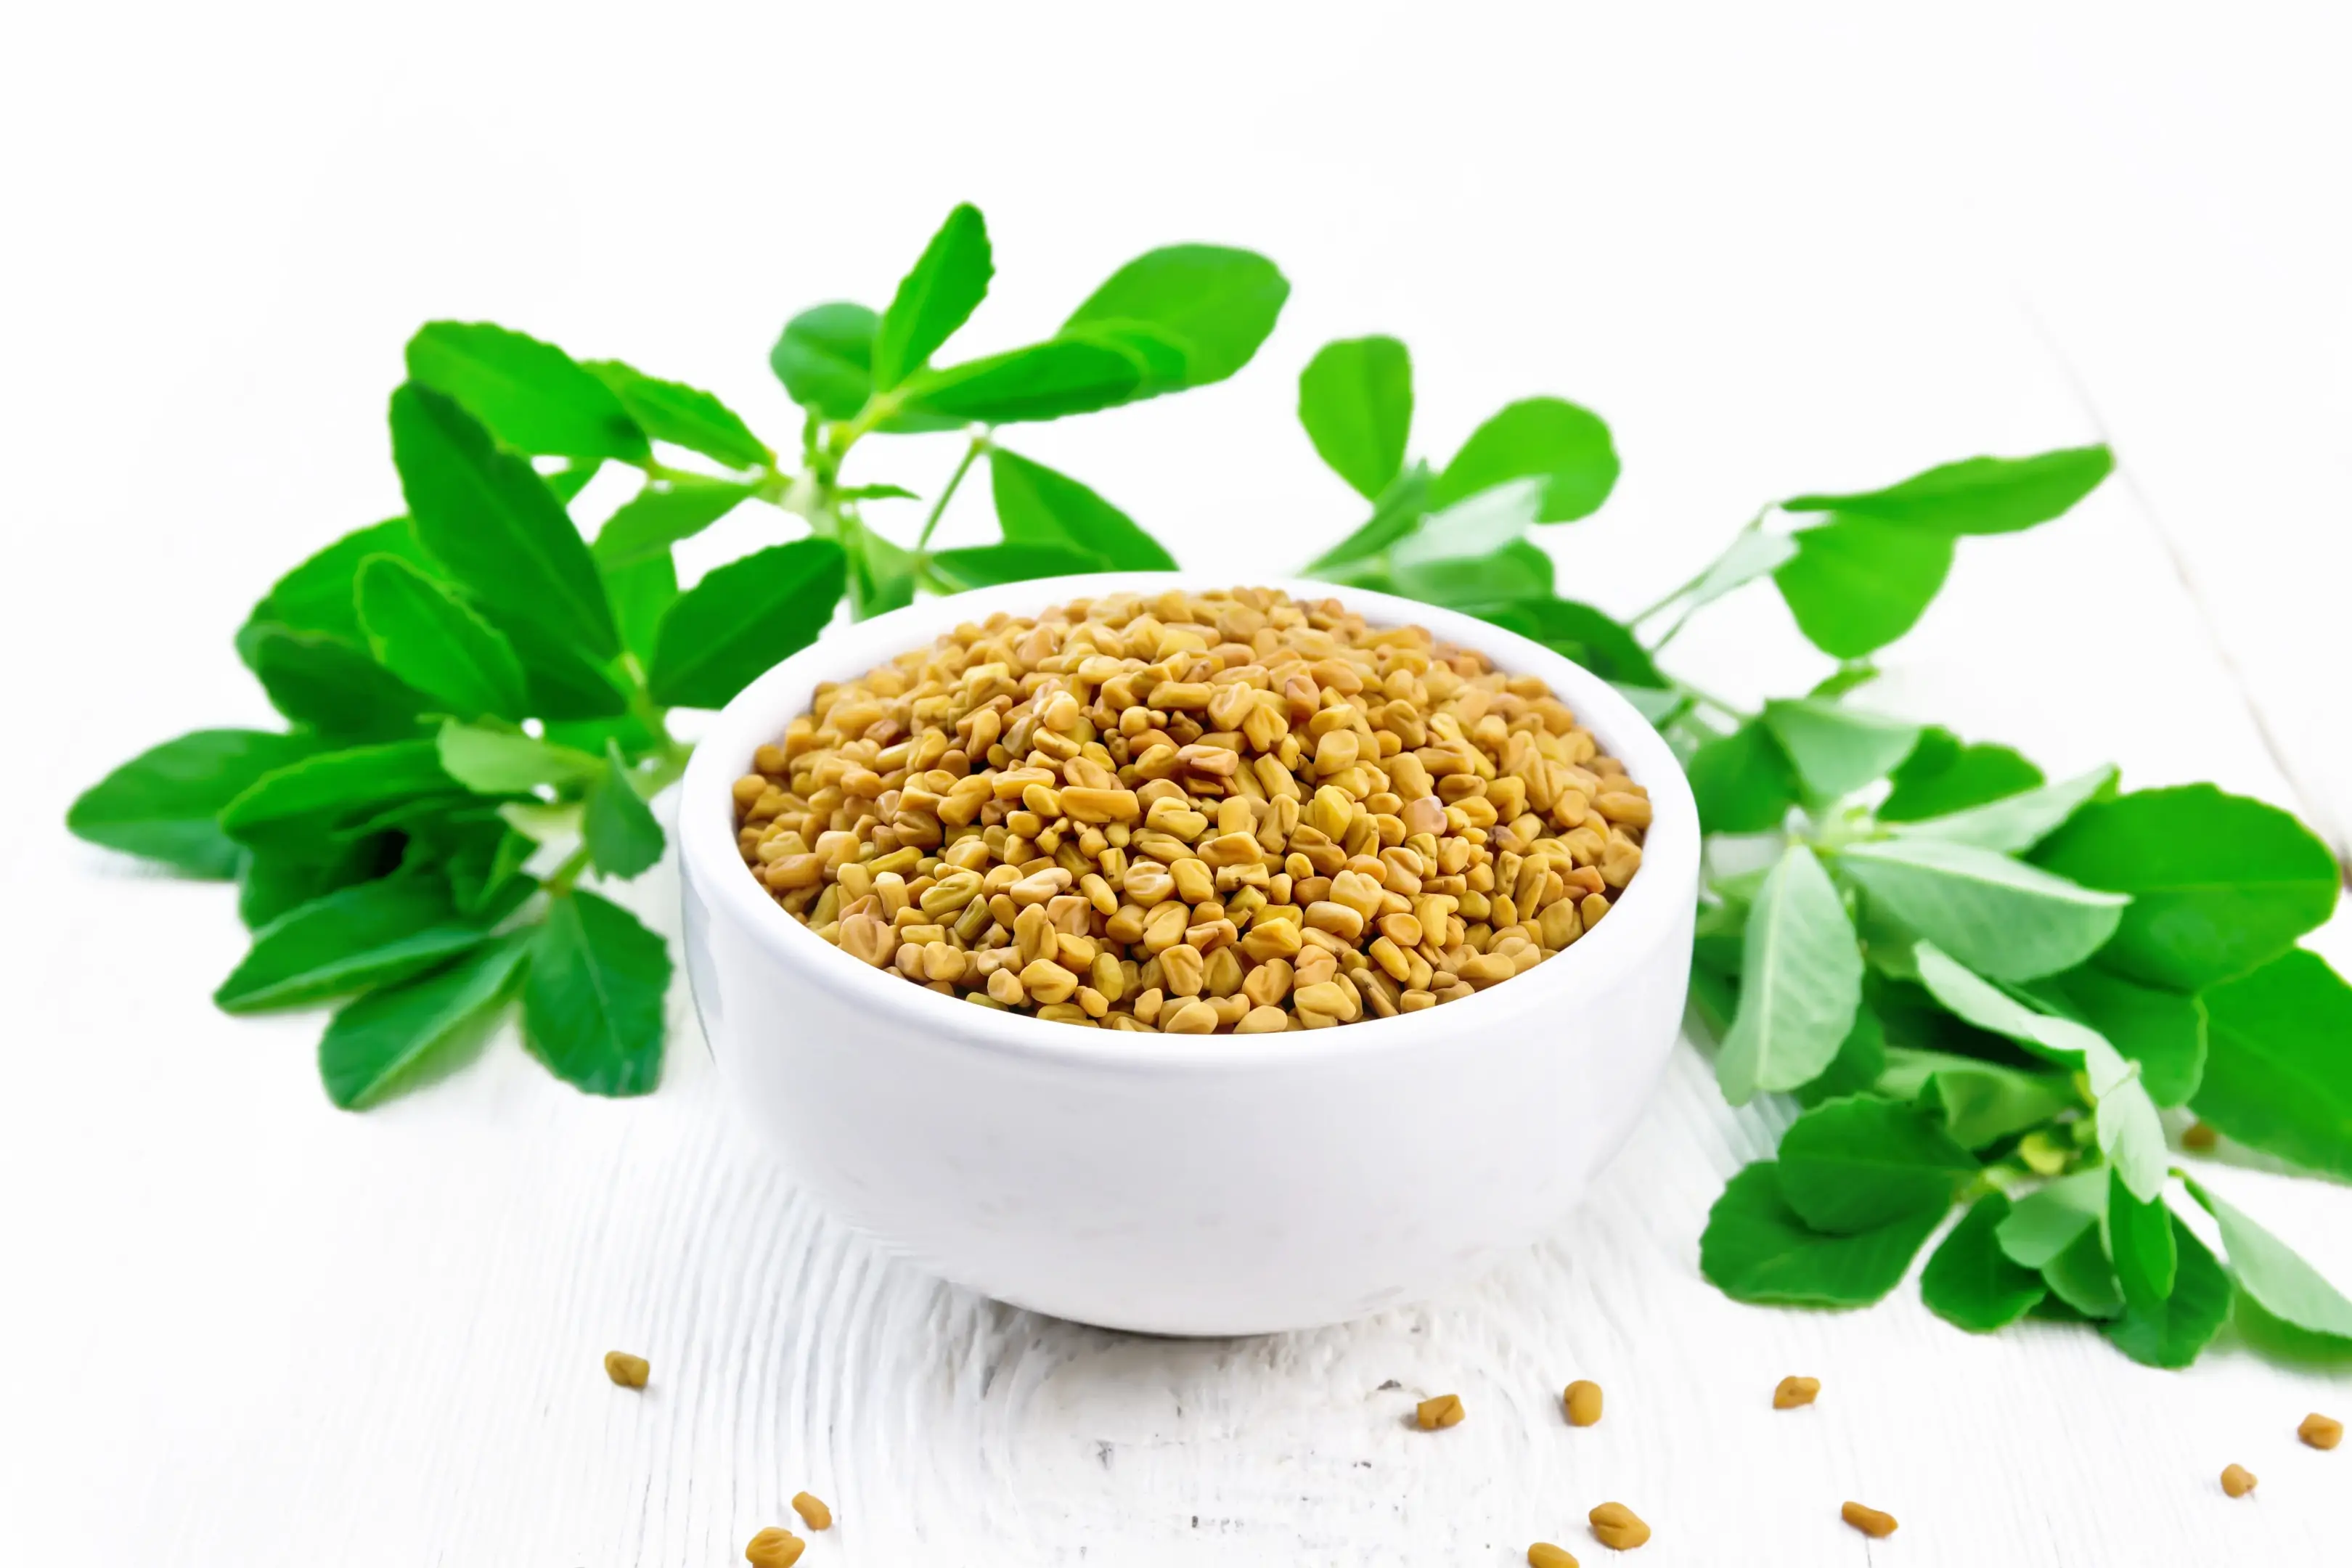 Fenugreek seeds with in a bowl with green leaves